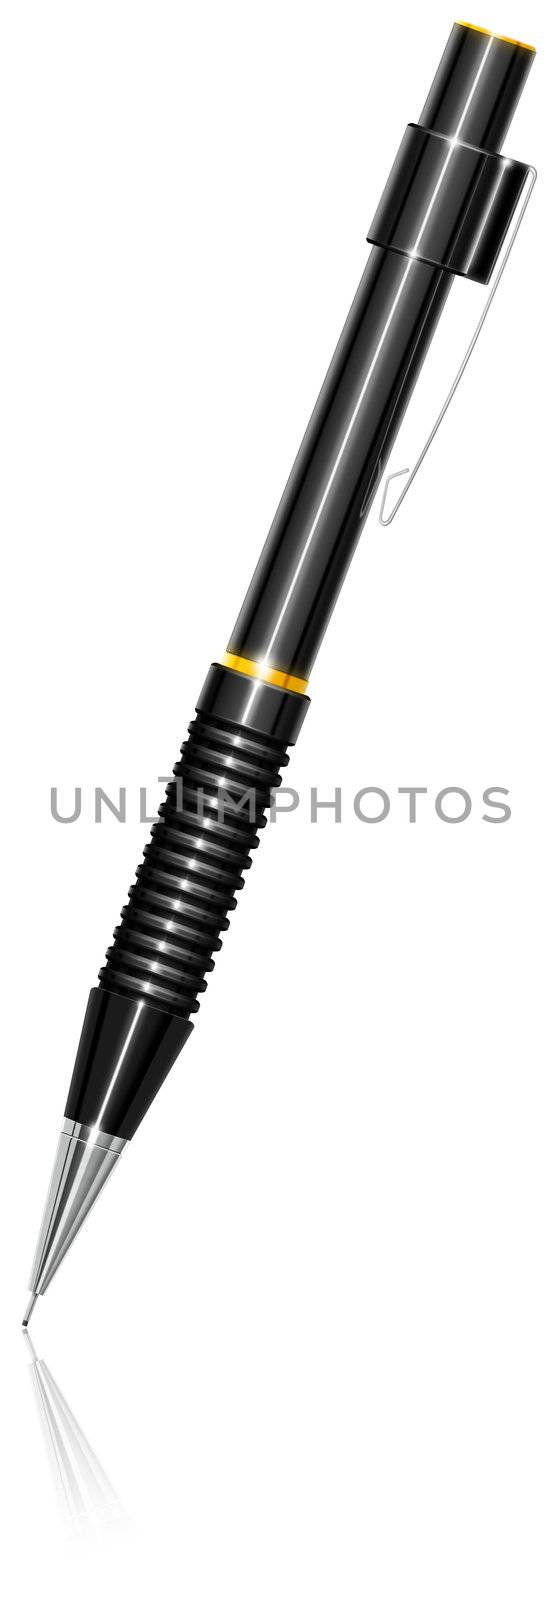 Illustration of black propelling pencil with reflection